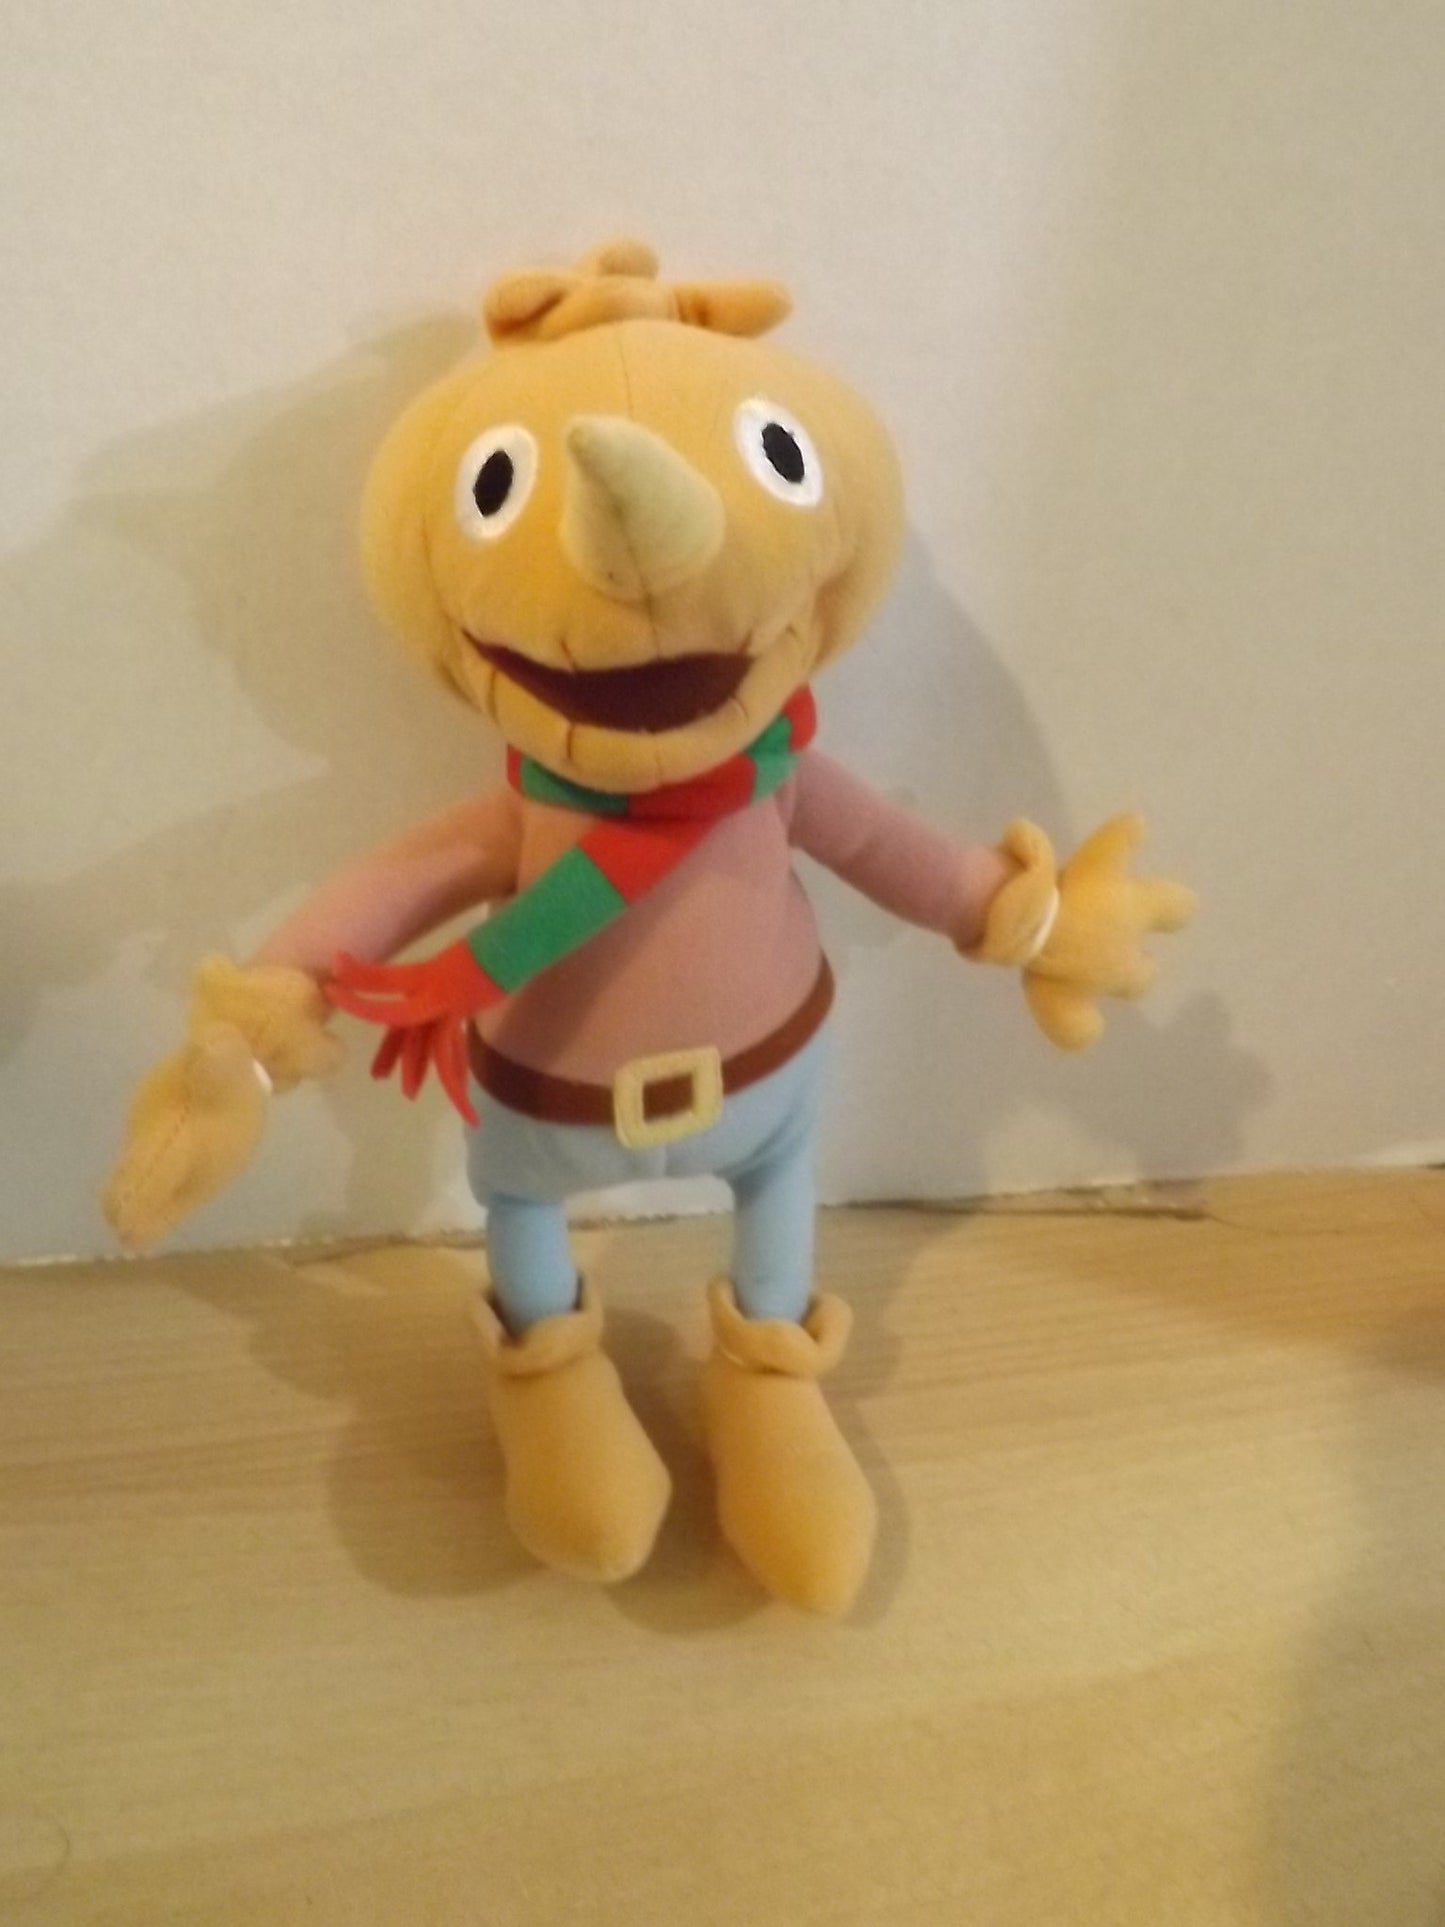 Bob the Builder's Friend Scarecrow 10" Tall Soft Bendable Poseable